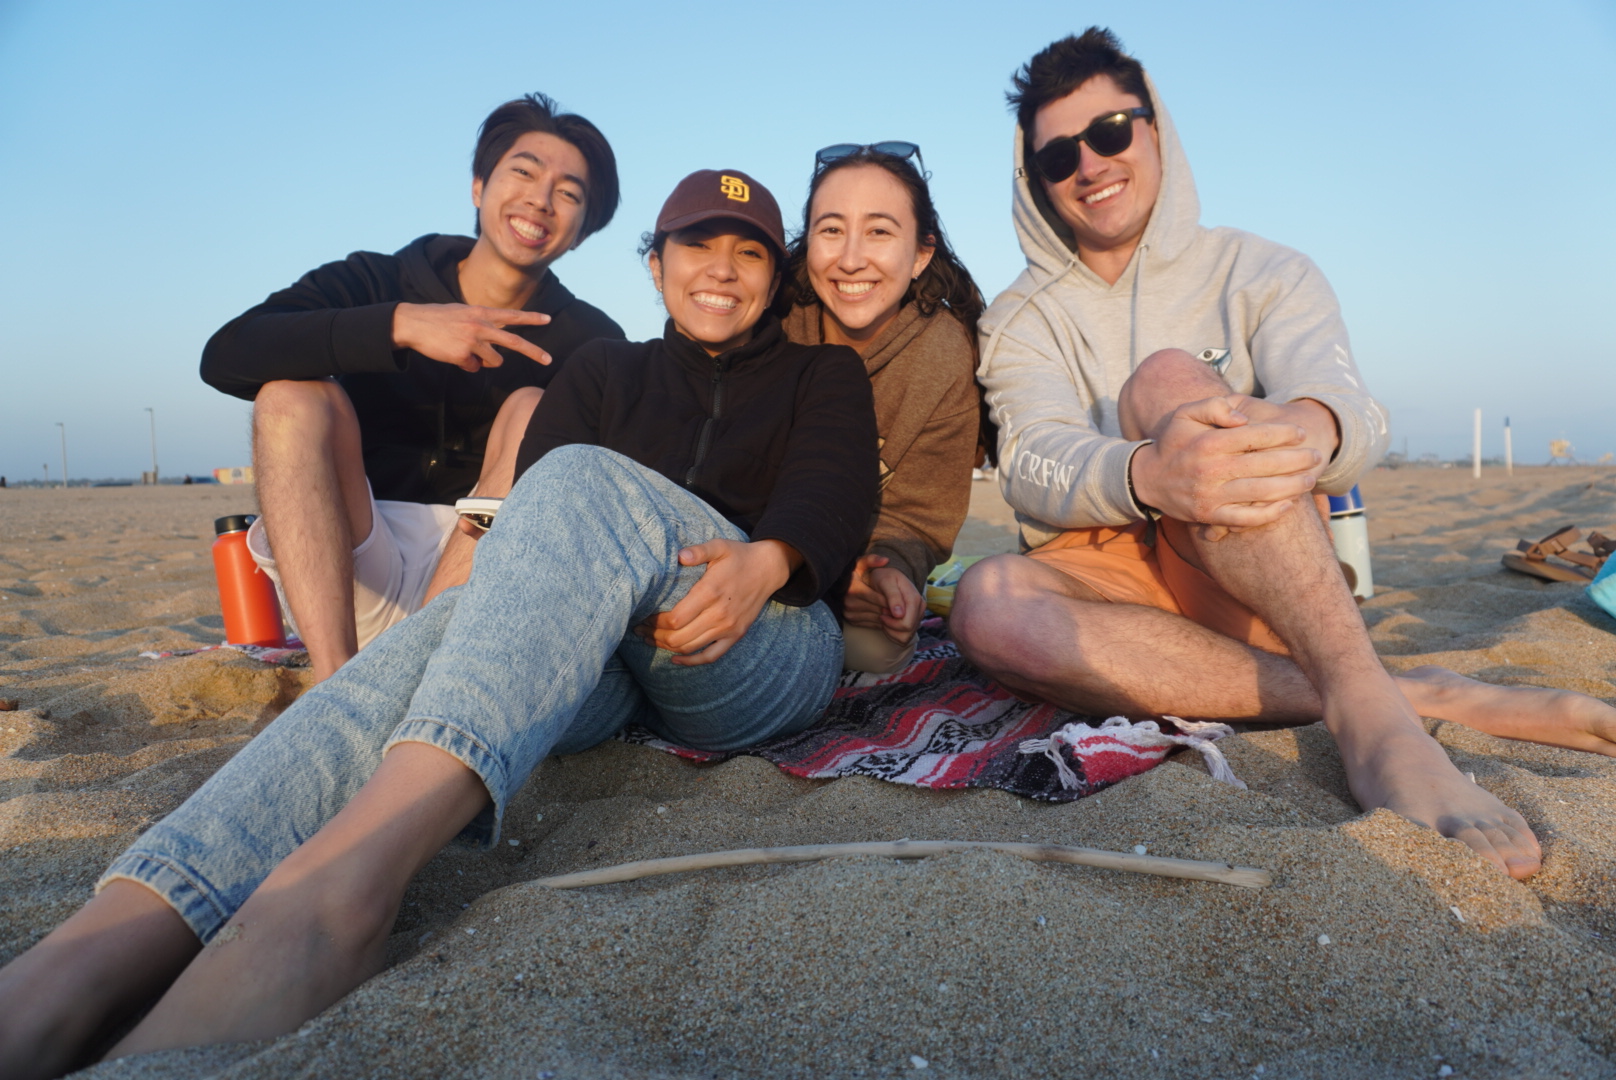 Students at the beach